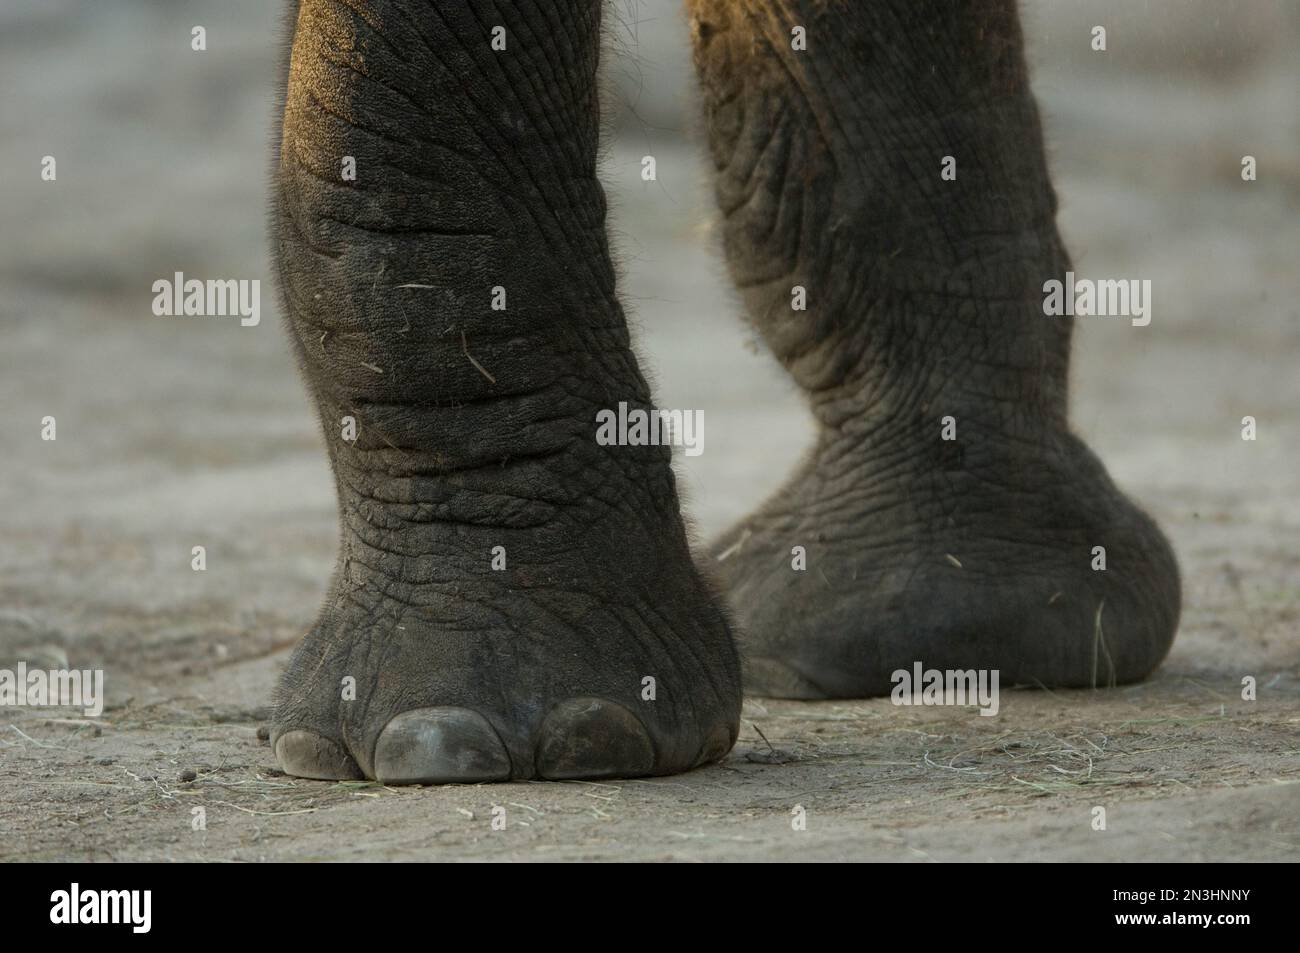 Close-up of the feet of an African elephant (Loxodonta africana) in a zoo; Wichita, Kansas, United States of America Stock Photo